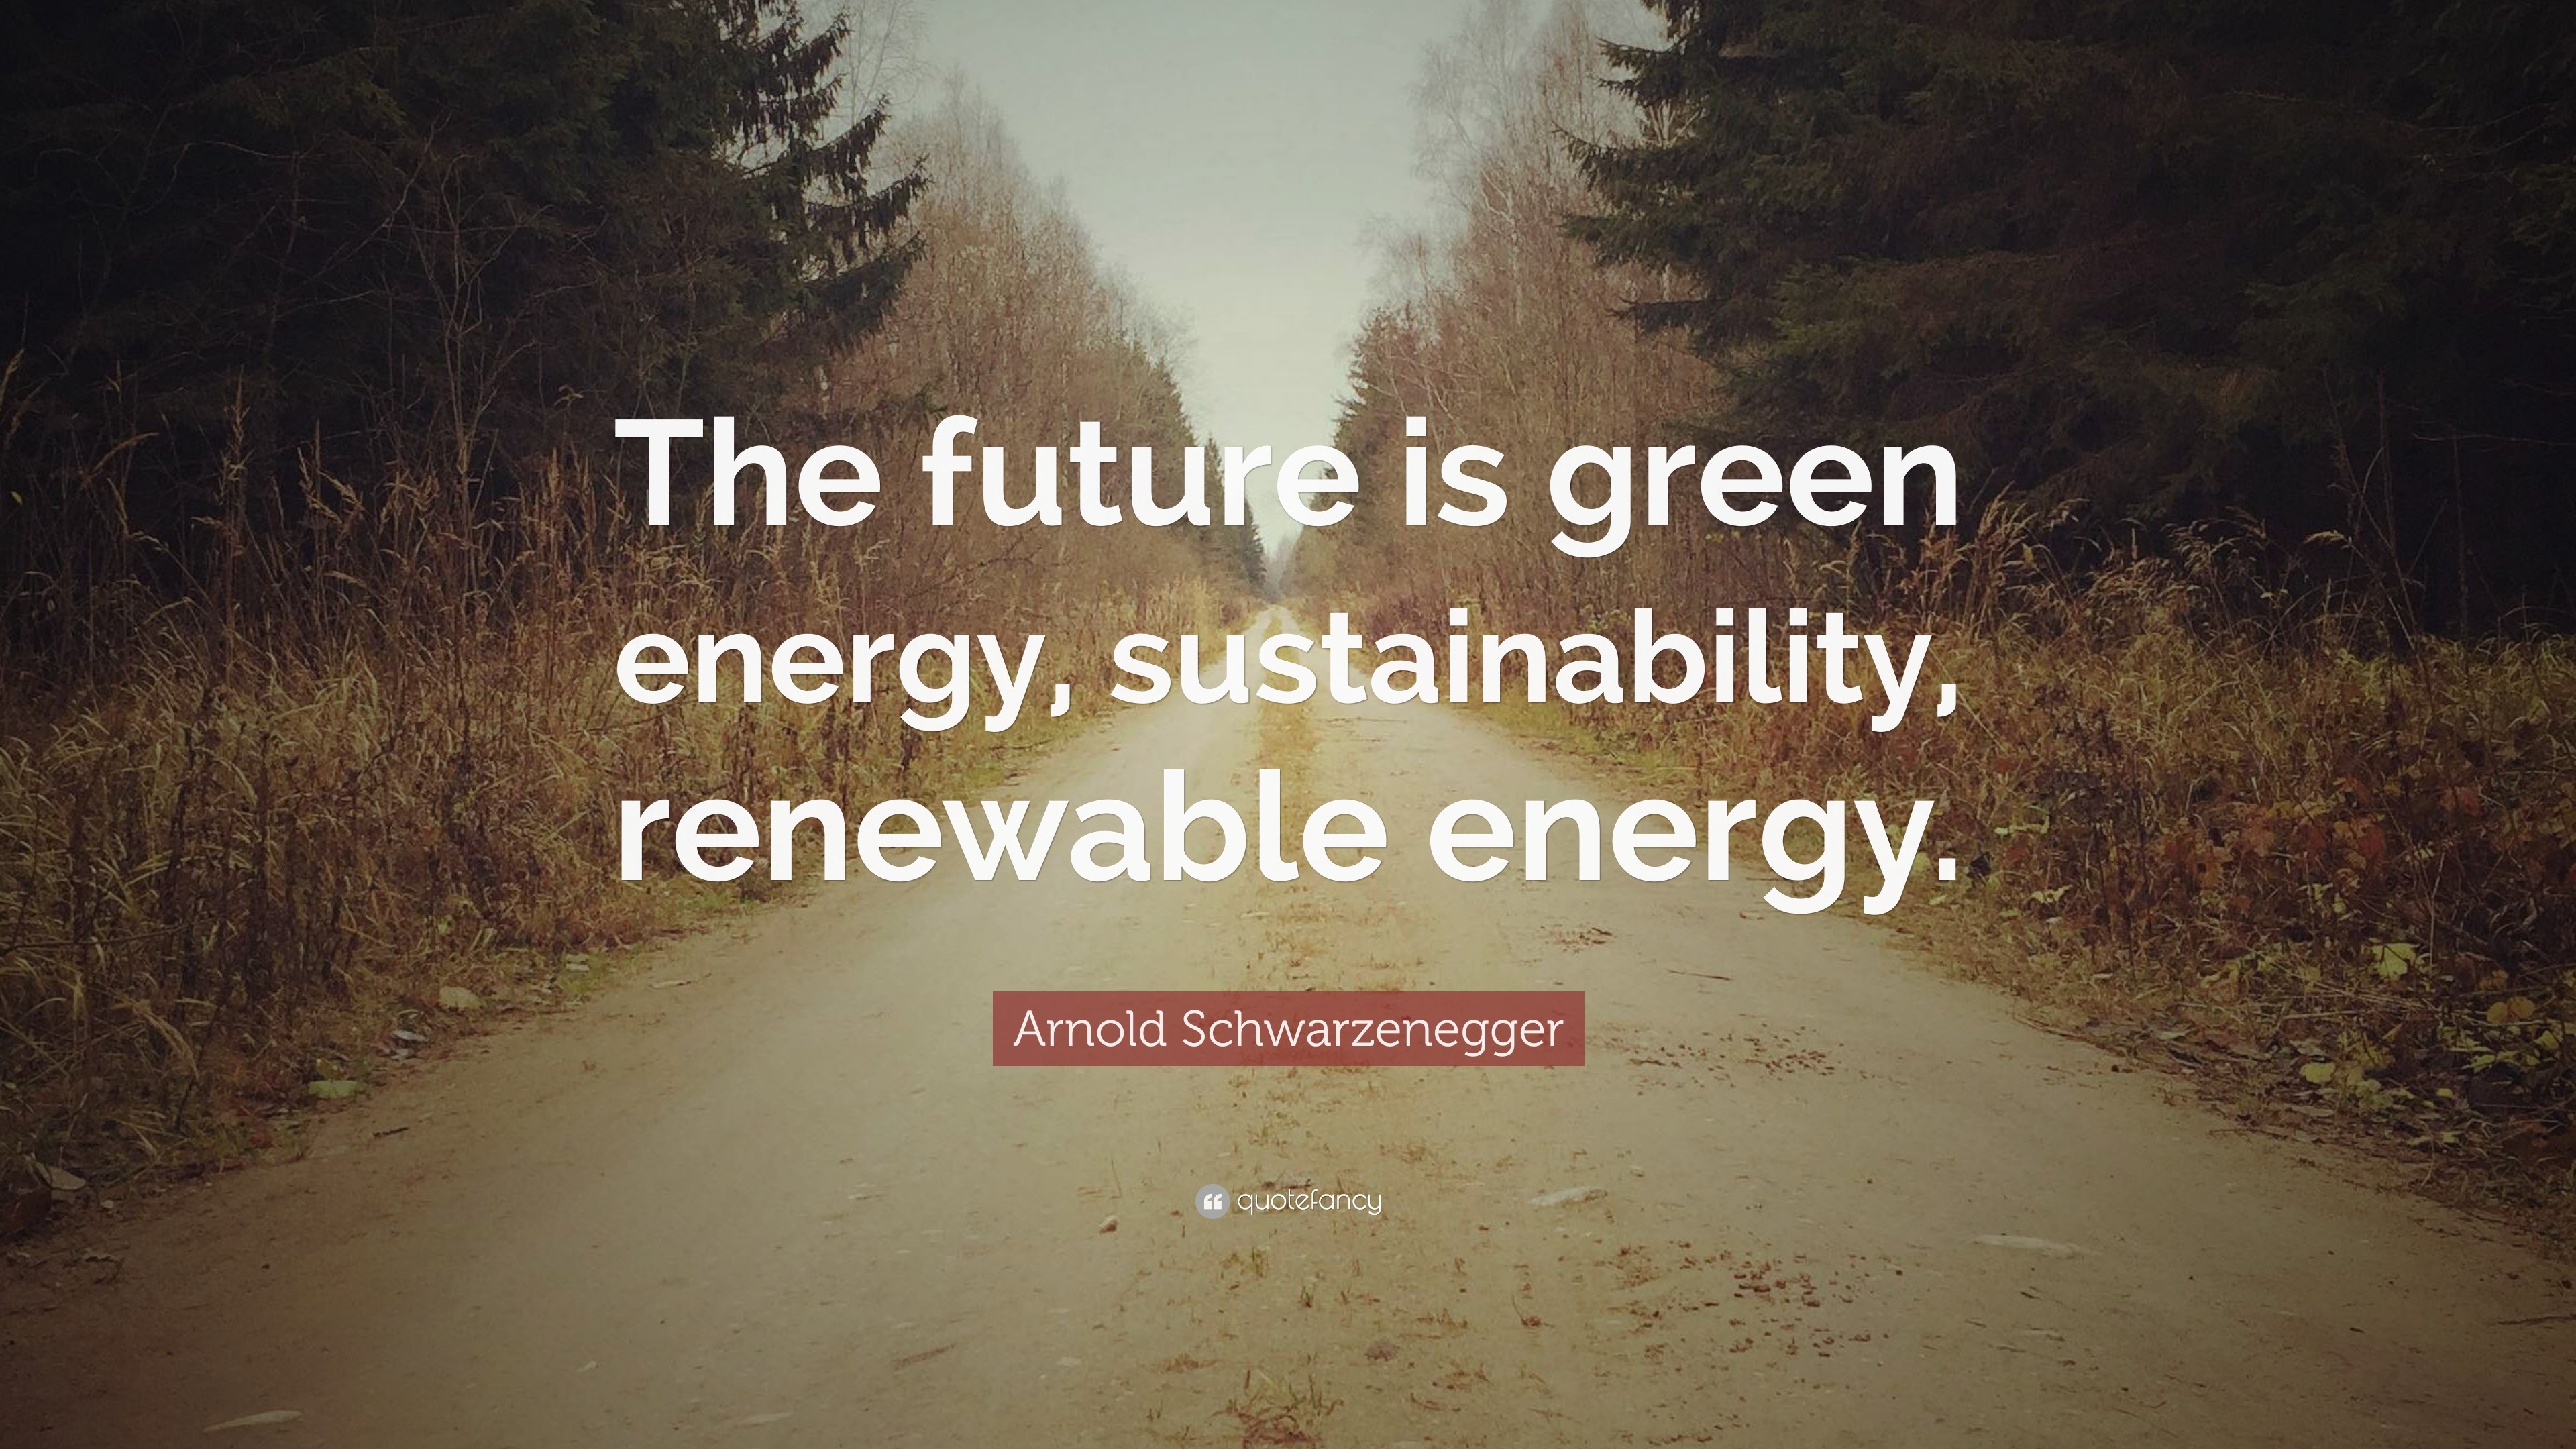 Arnold Schwarzenegger Quote: “The future is green energy